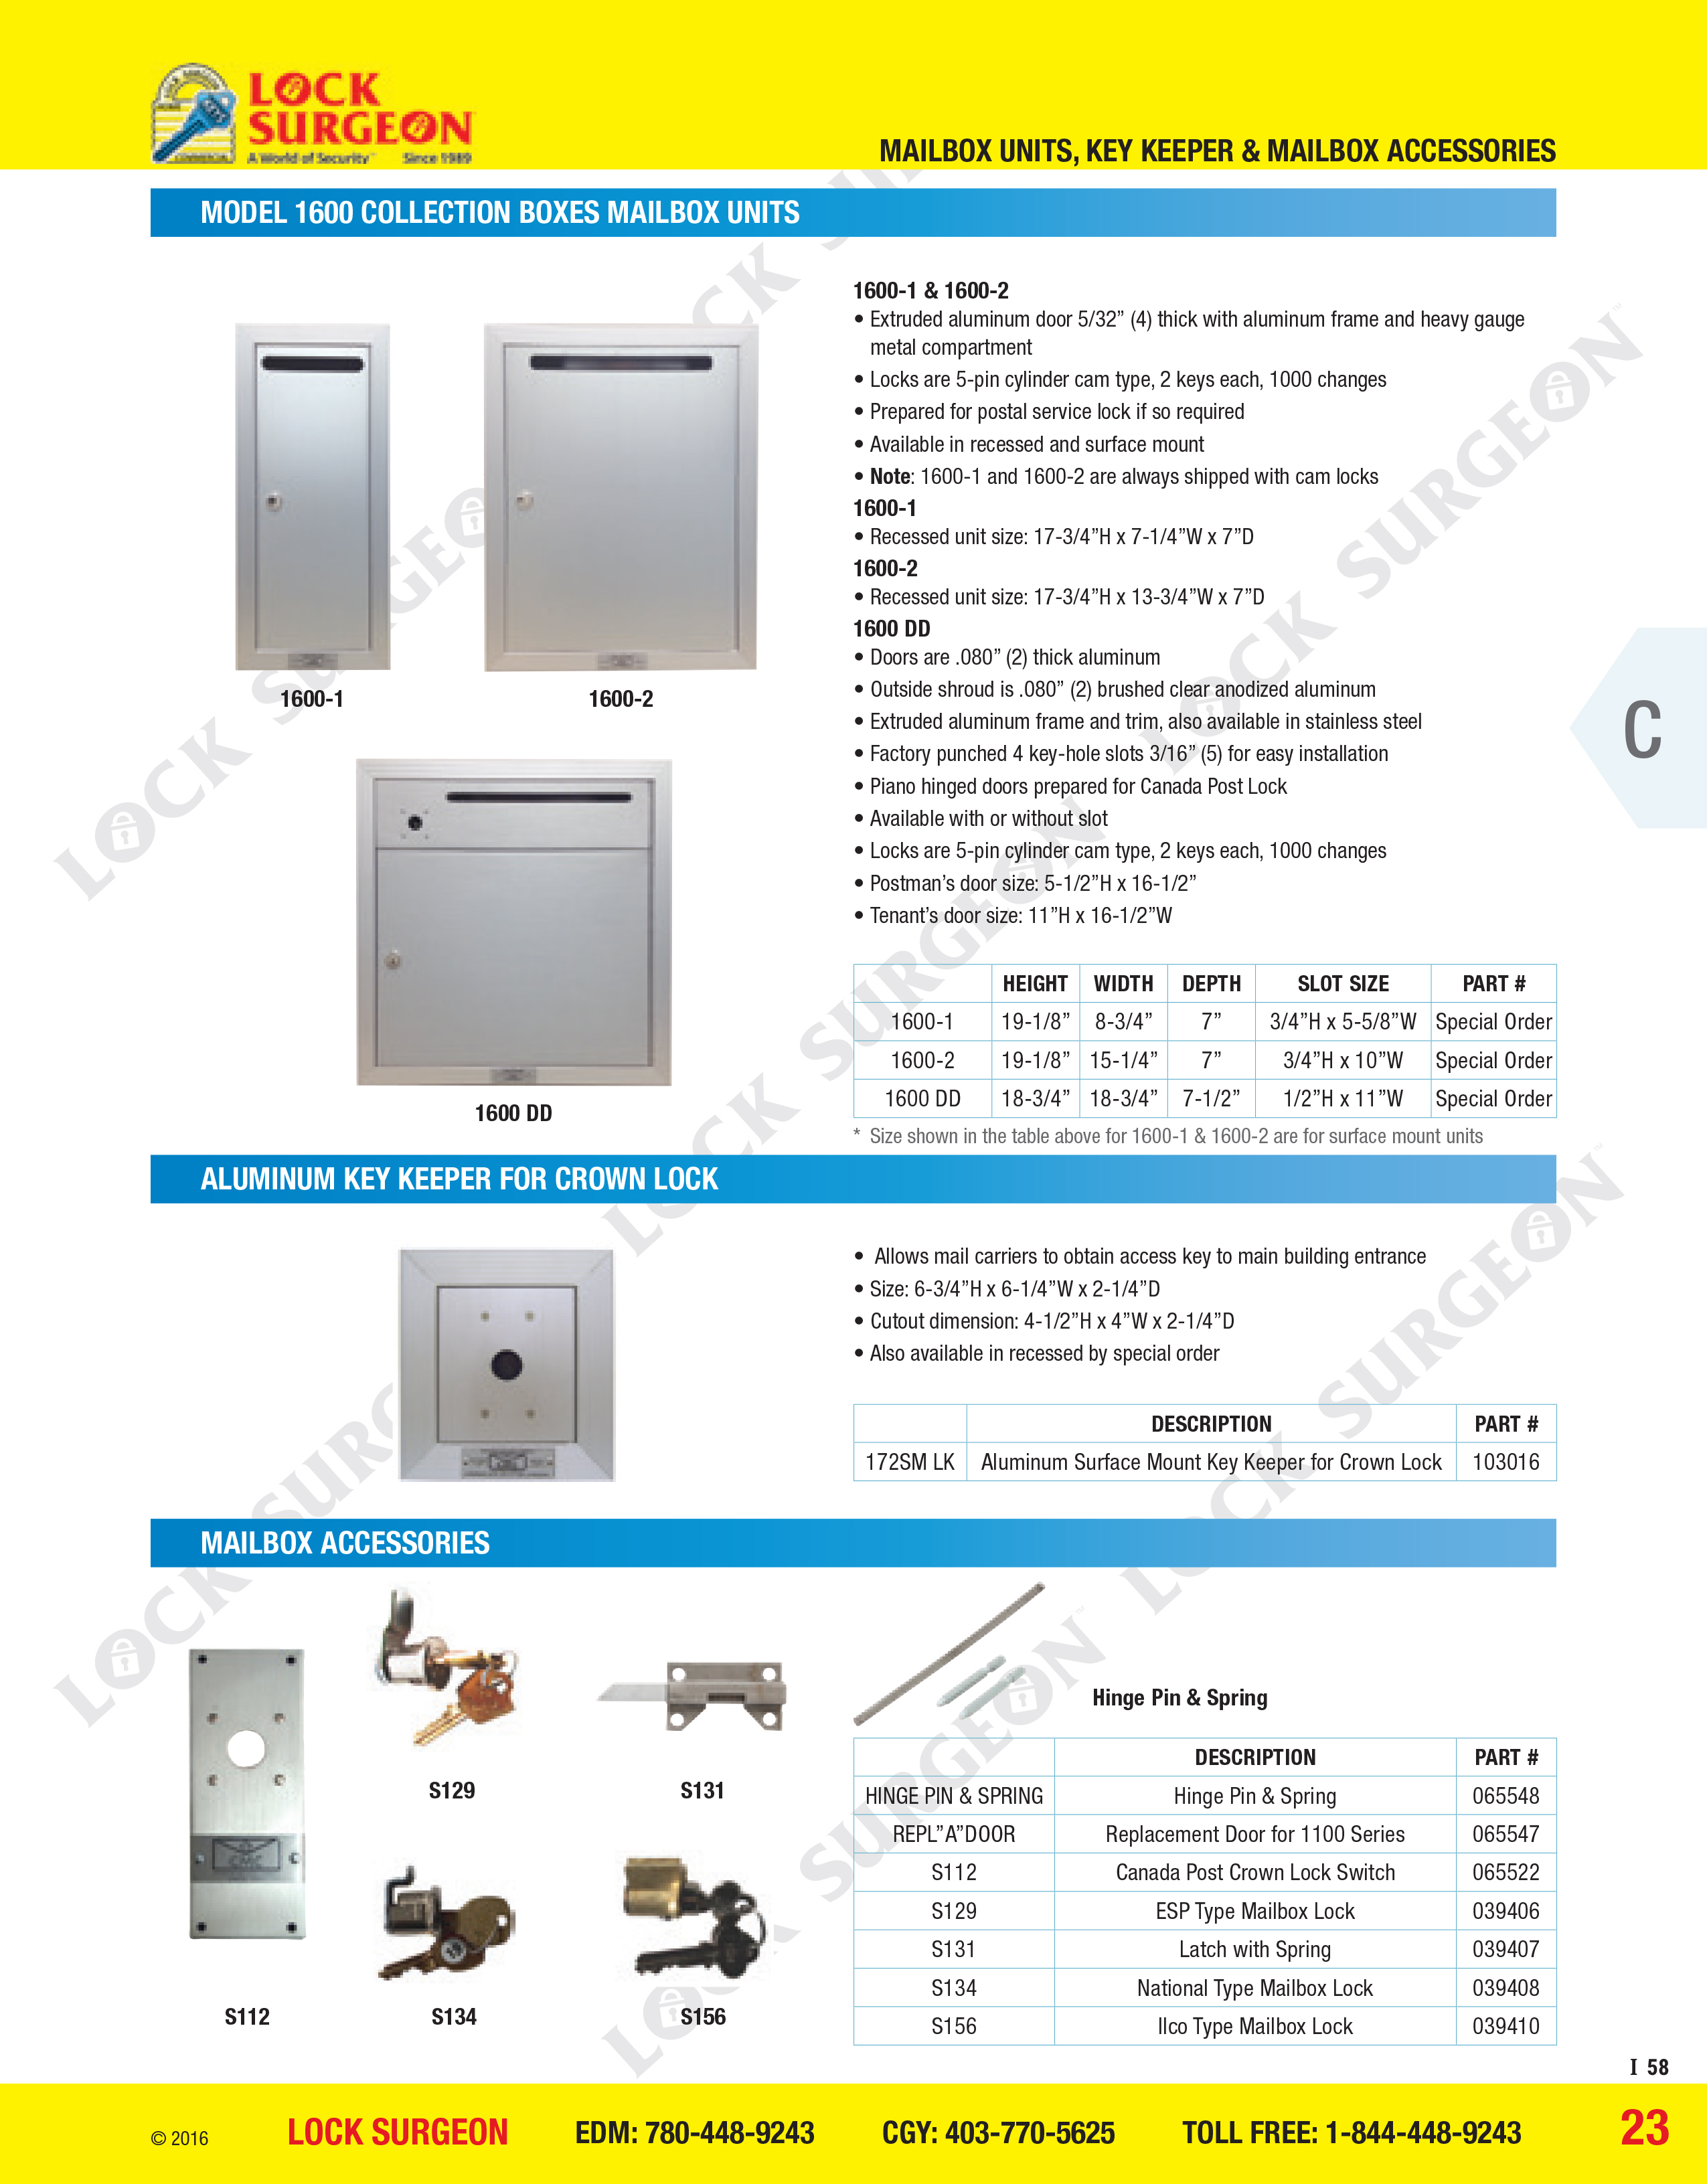 Model 1600 collection boxes mailbox units, aluminium key keeper for crown lock, Mailbox accessories